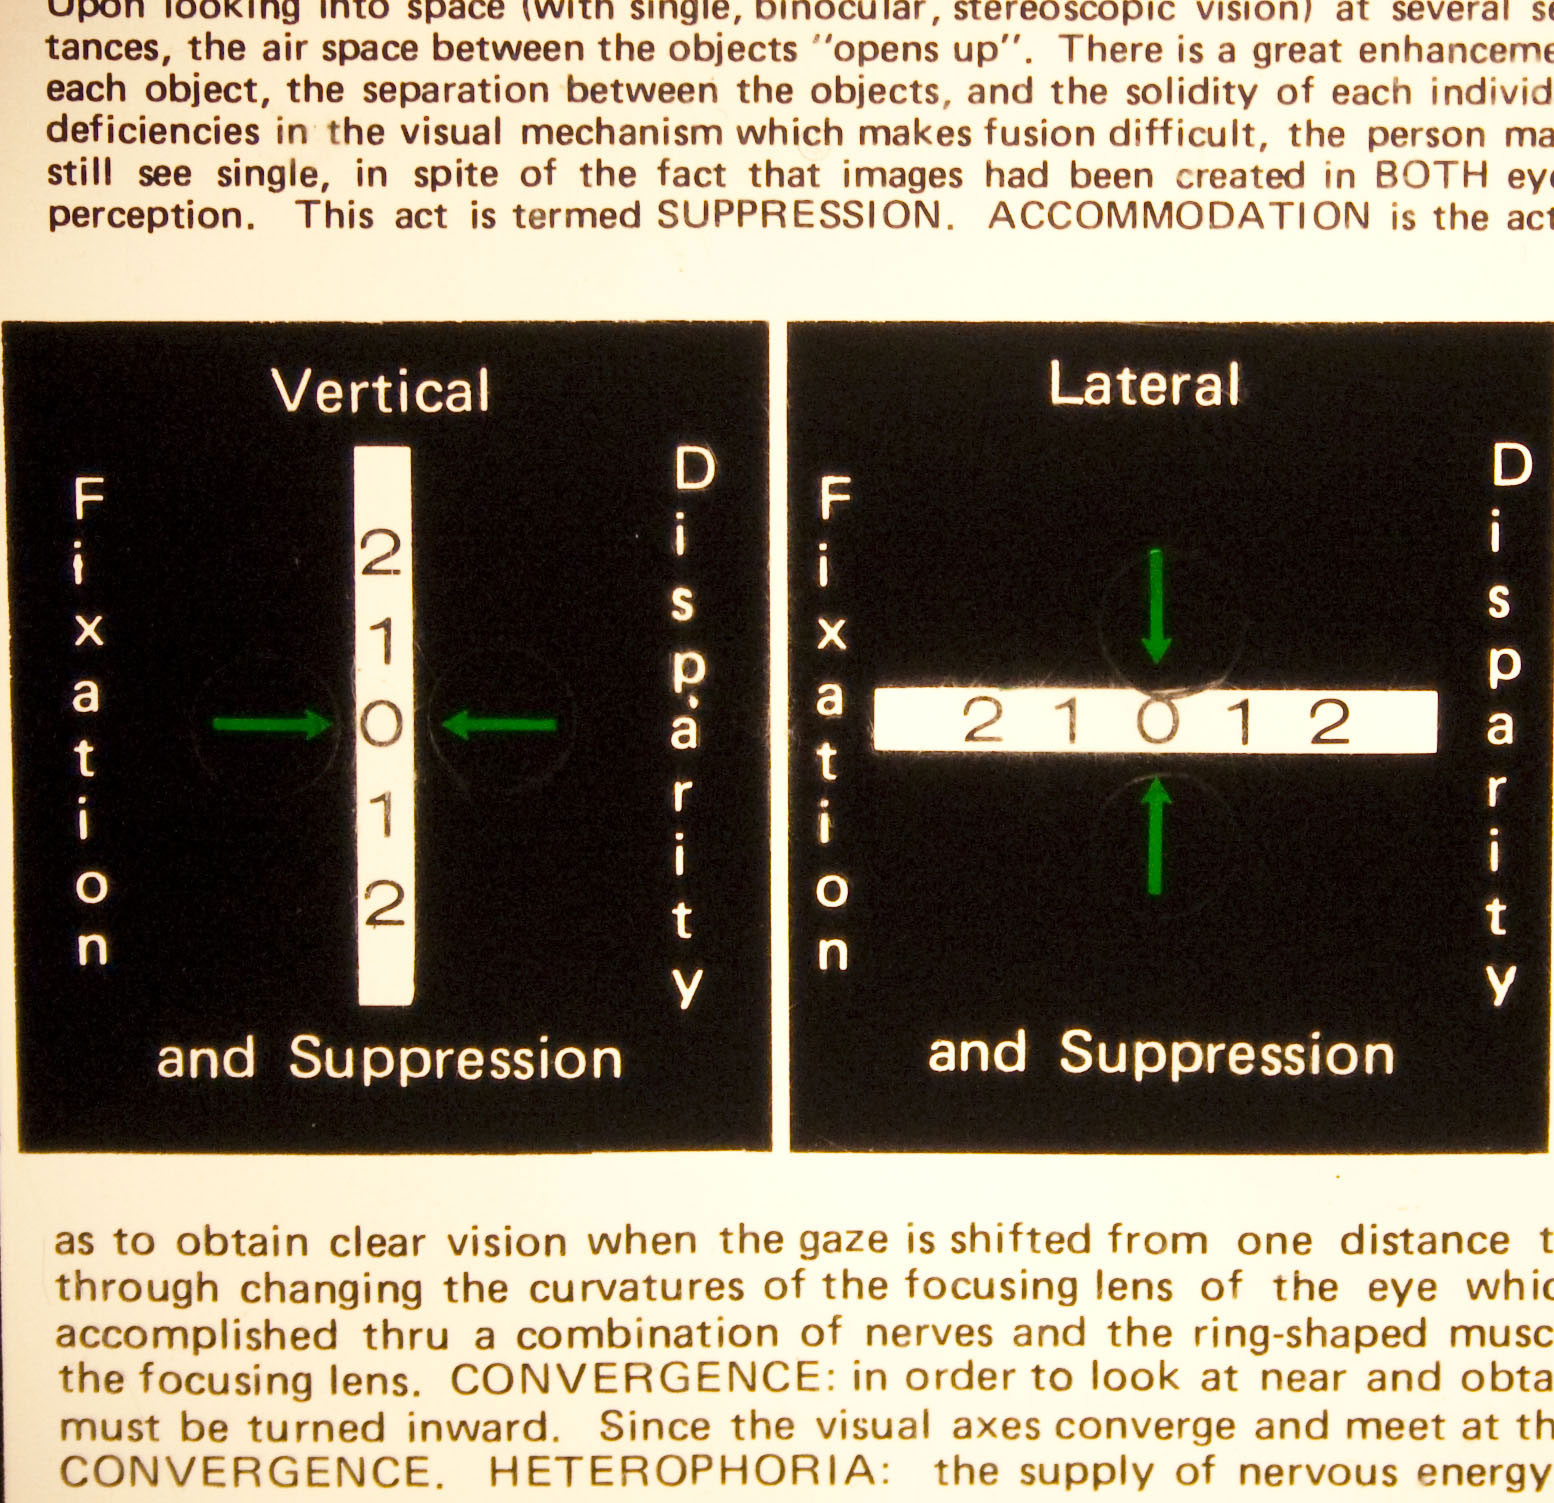 This is the central part of a Mallett card. Each of the green arrows has a circular-shaped Polaroid material over it. When viewed with Polaroid glasses, the arrow to the right on the vertical test and the upper arrow on the lateral test can be seen with the right eye, and the other two can be seen with the left. Everything else is seen with both eyes and acts as fusion locks.